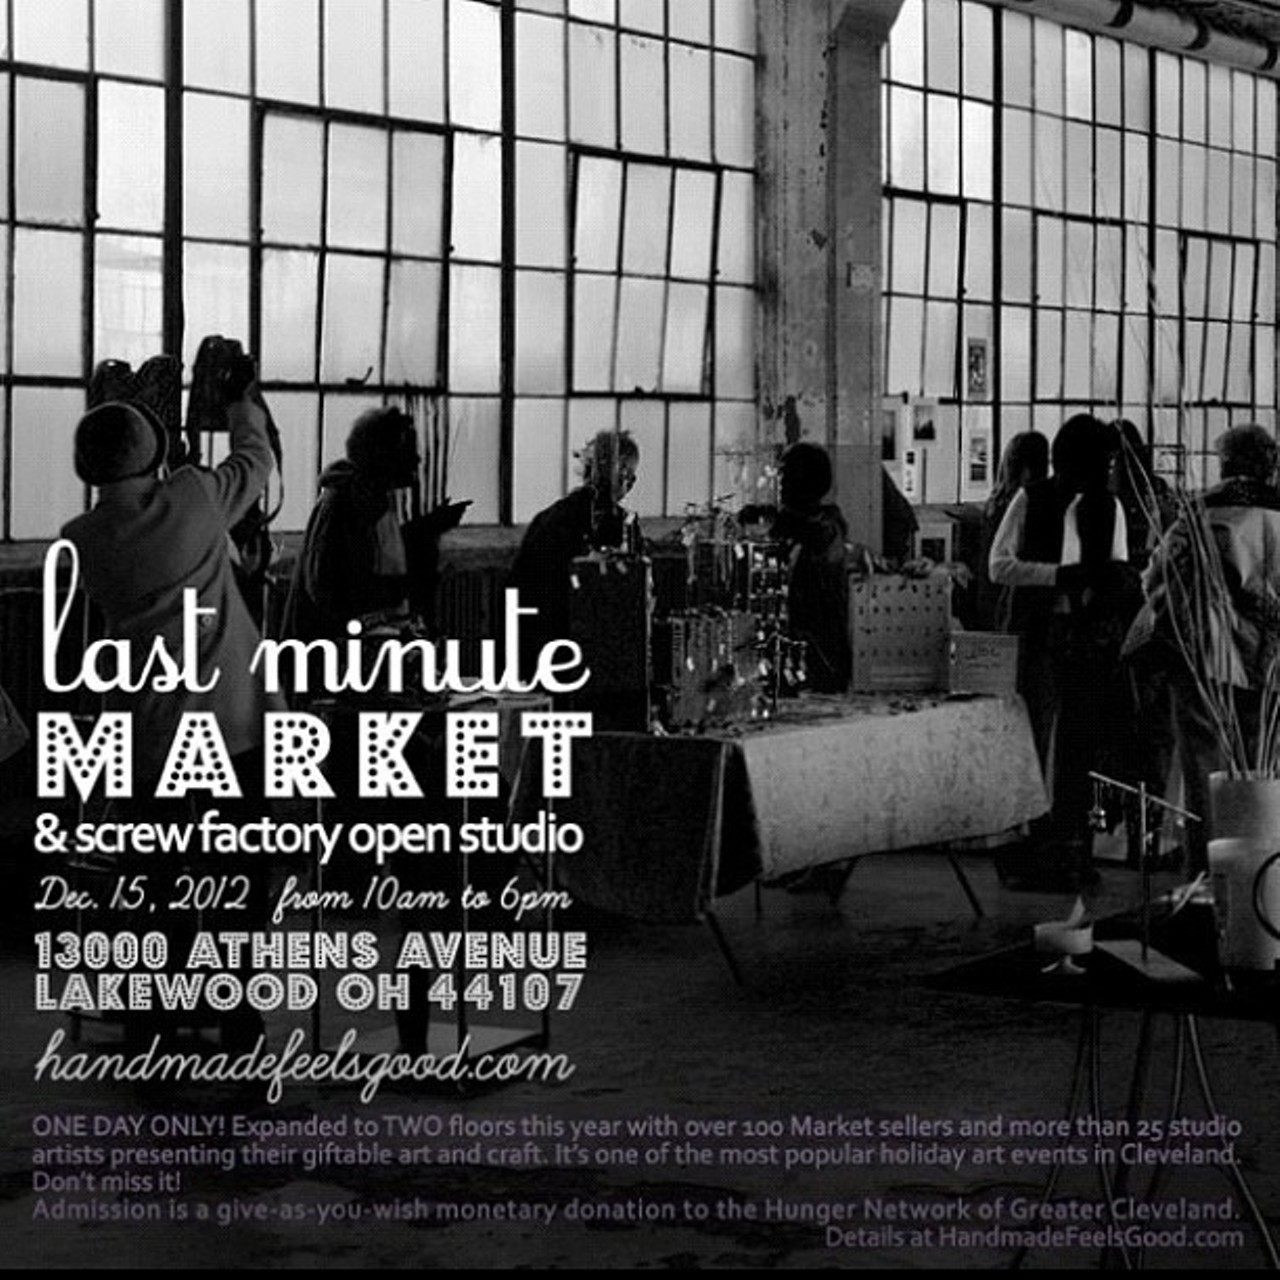 If you've over indulged in holiday procrastination (we're guilty too), then head on over to the appropriately named Last Minute Market & Screw Factory Open Studio in Lakewood to wrap up all of your holiday shopping in one fell swoop. More than 100 jury-selected artists will be on hand selling handcraft goods ranging from jewelry and accessories to prints and fine art. It's all brought to you by Cleveland Handmade Market. In addition to the dozens of pop-up vendors, many permanent artists who work out of the Screw Factory will offer shoppers a peek into their workspaces and an opportunity to buy their work. It all takes places today from 10 a.m. to 6 p.m. (McConnell)
The Screw Factory
13000 Athens Ave., Lakewood WESTERN SUBURBS
screwfactoryartists.com